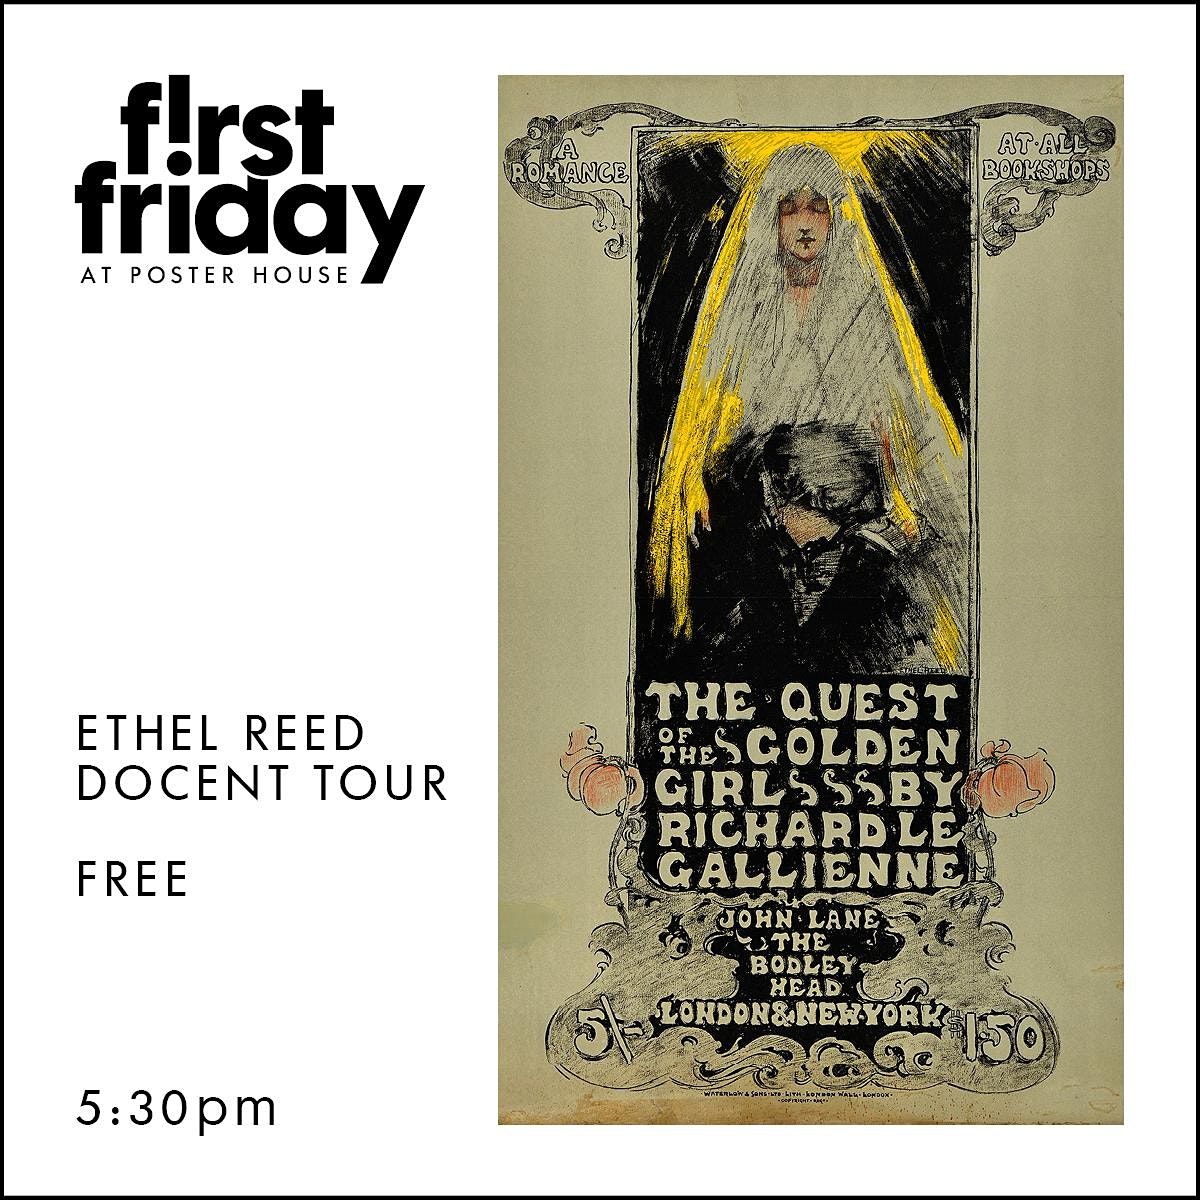 First Friday: Ethel Reed Docent Tour